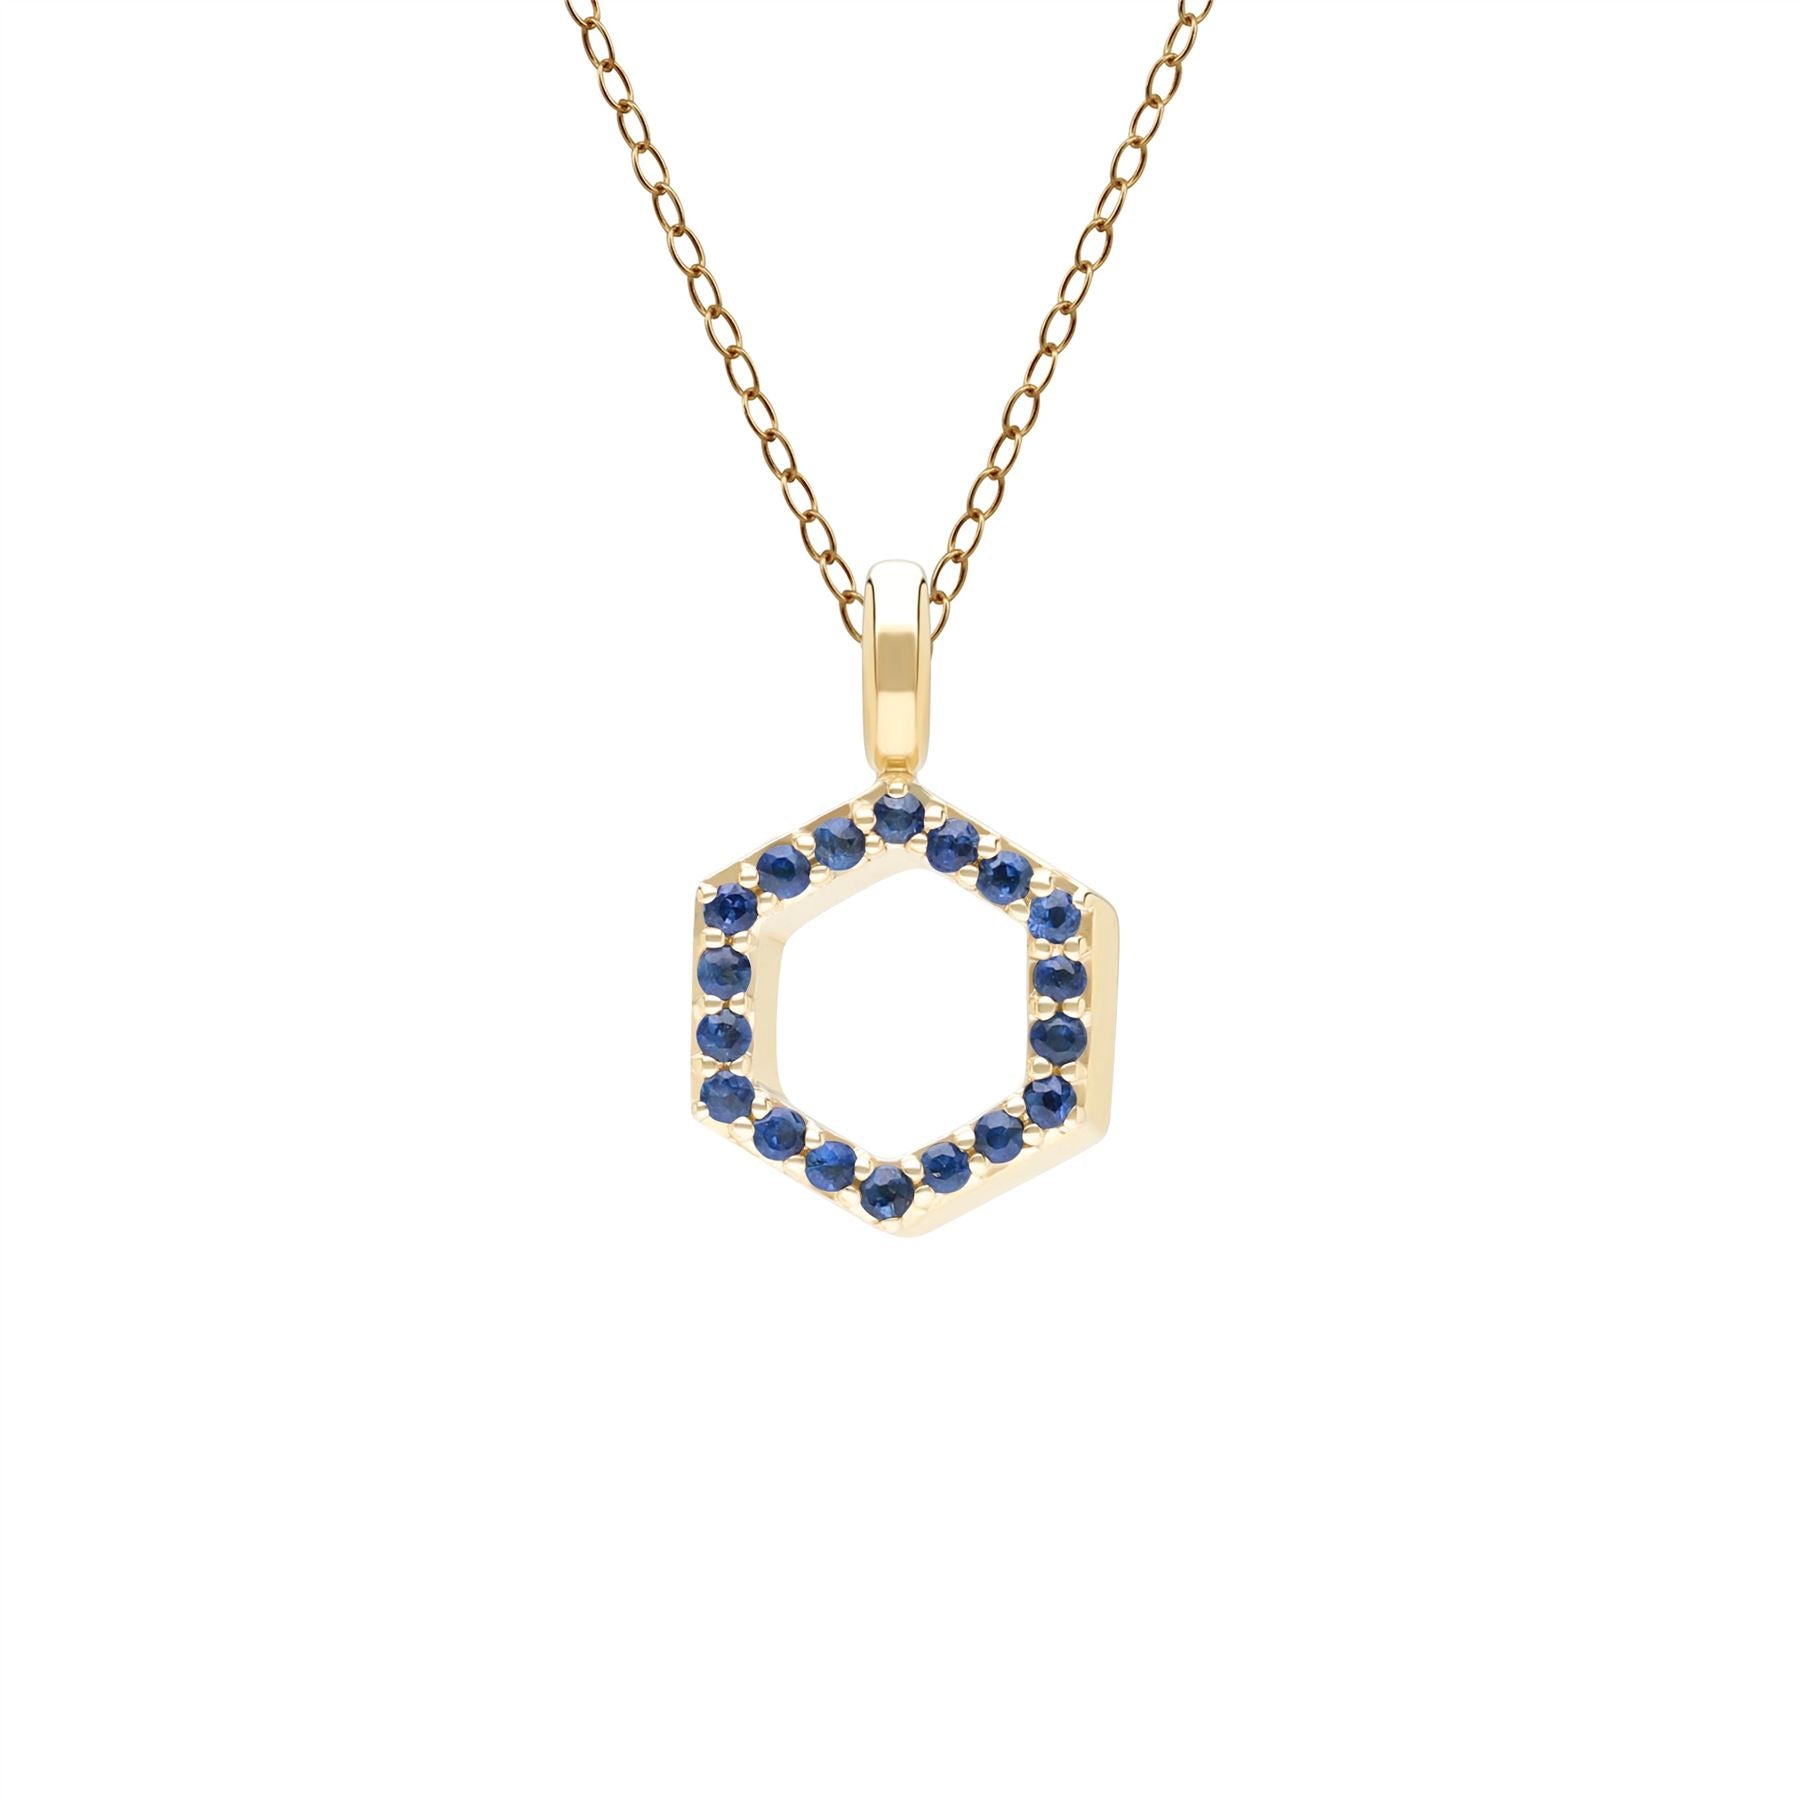 Geometric Hex Sapphire Pendant Necklace in 9ct Yellow Gold Front